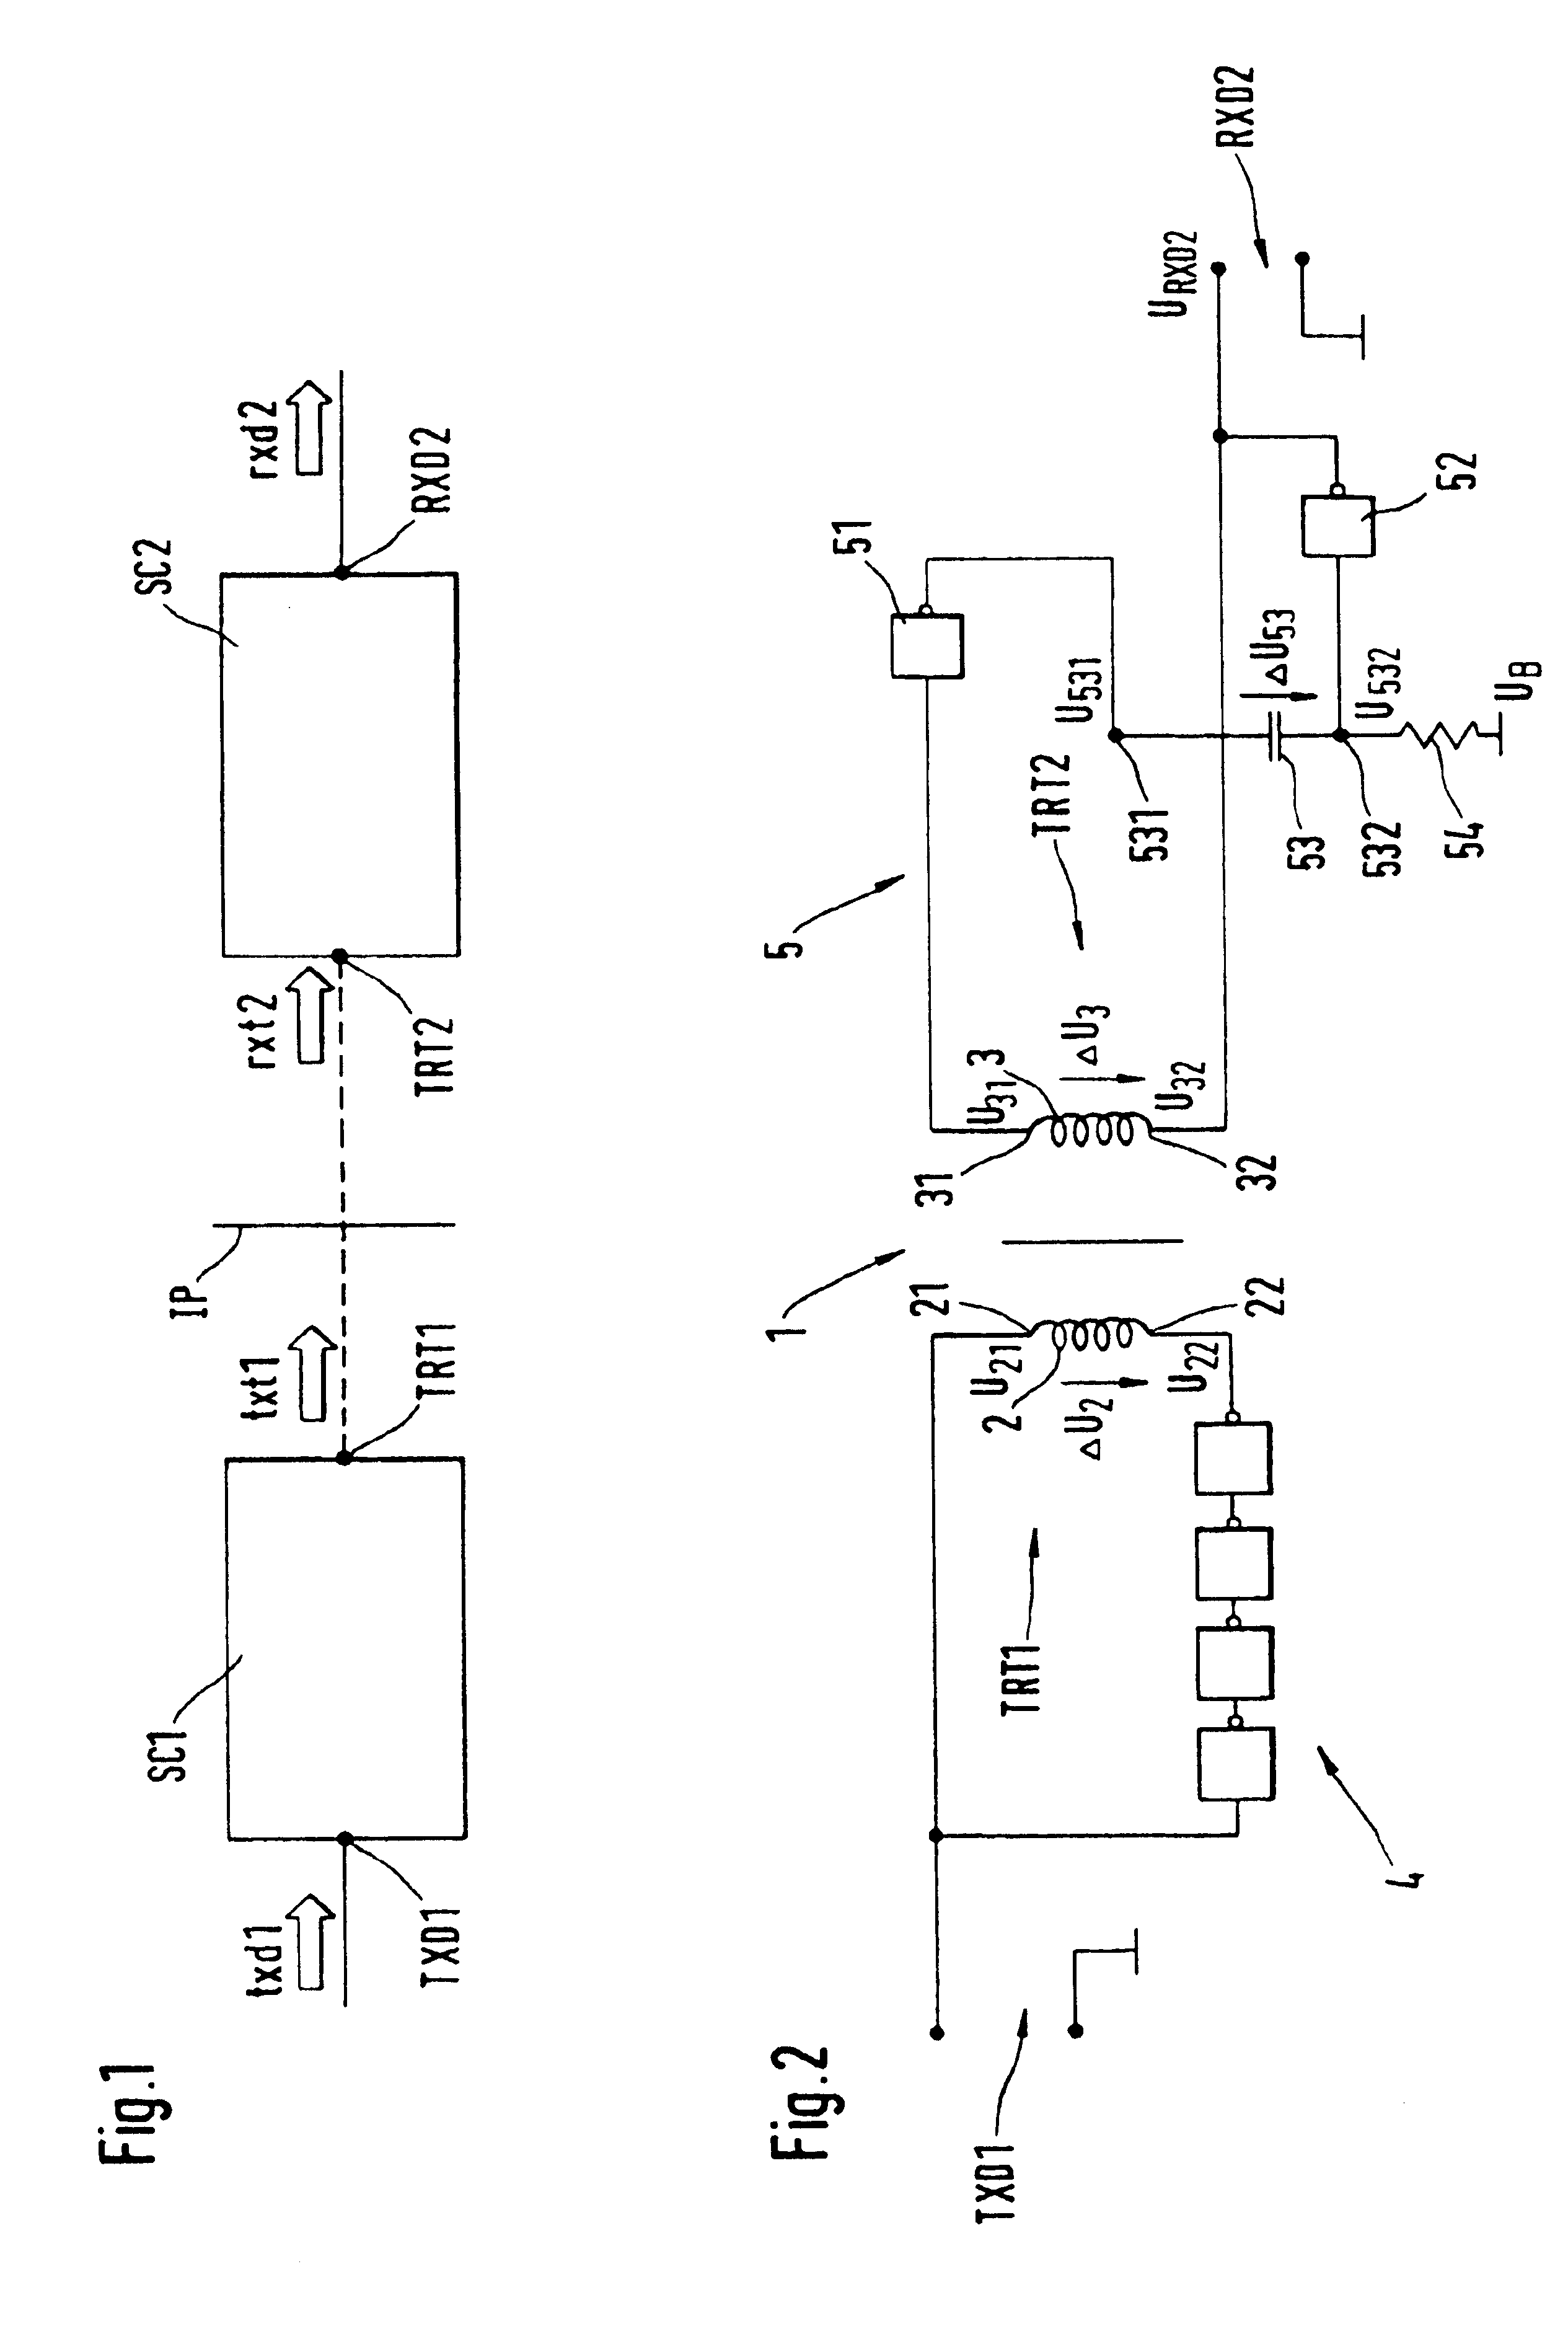 Circuit arrangement for the electrically isolated transfer of digital signals